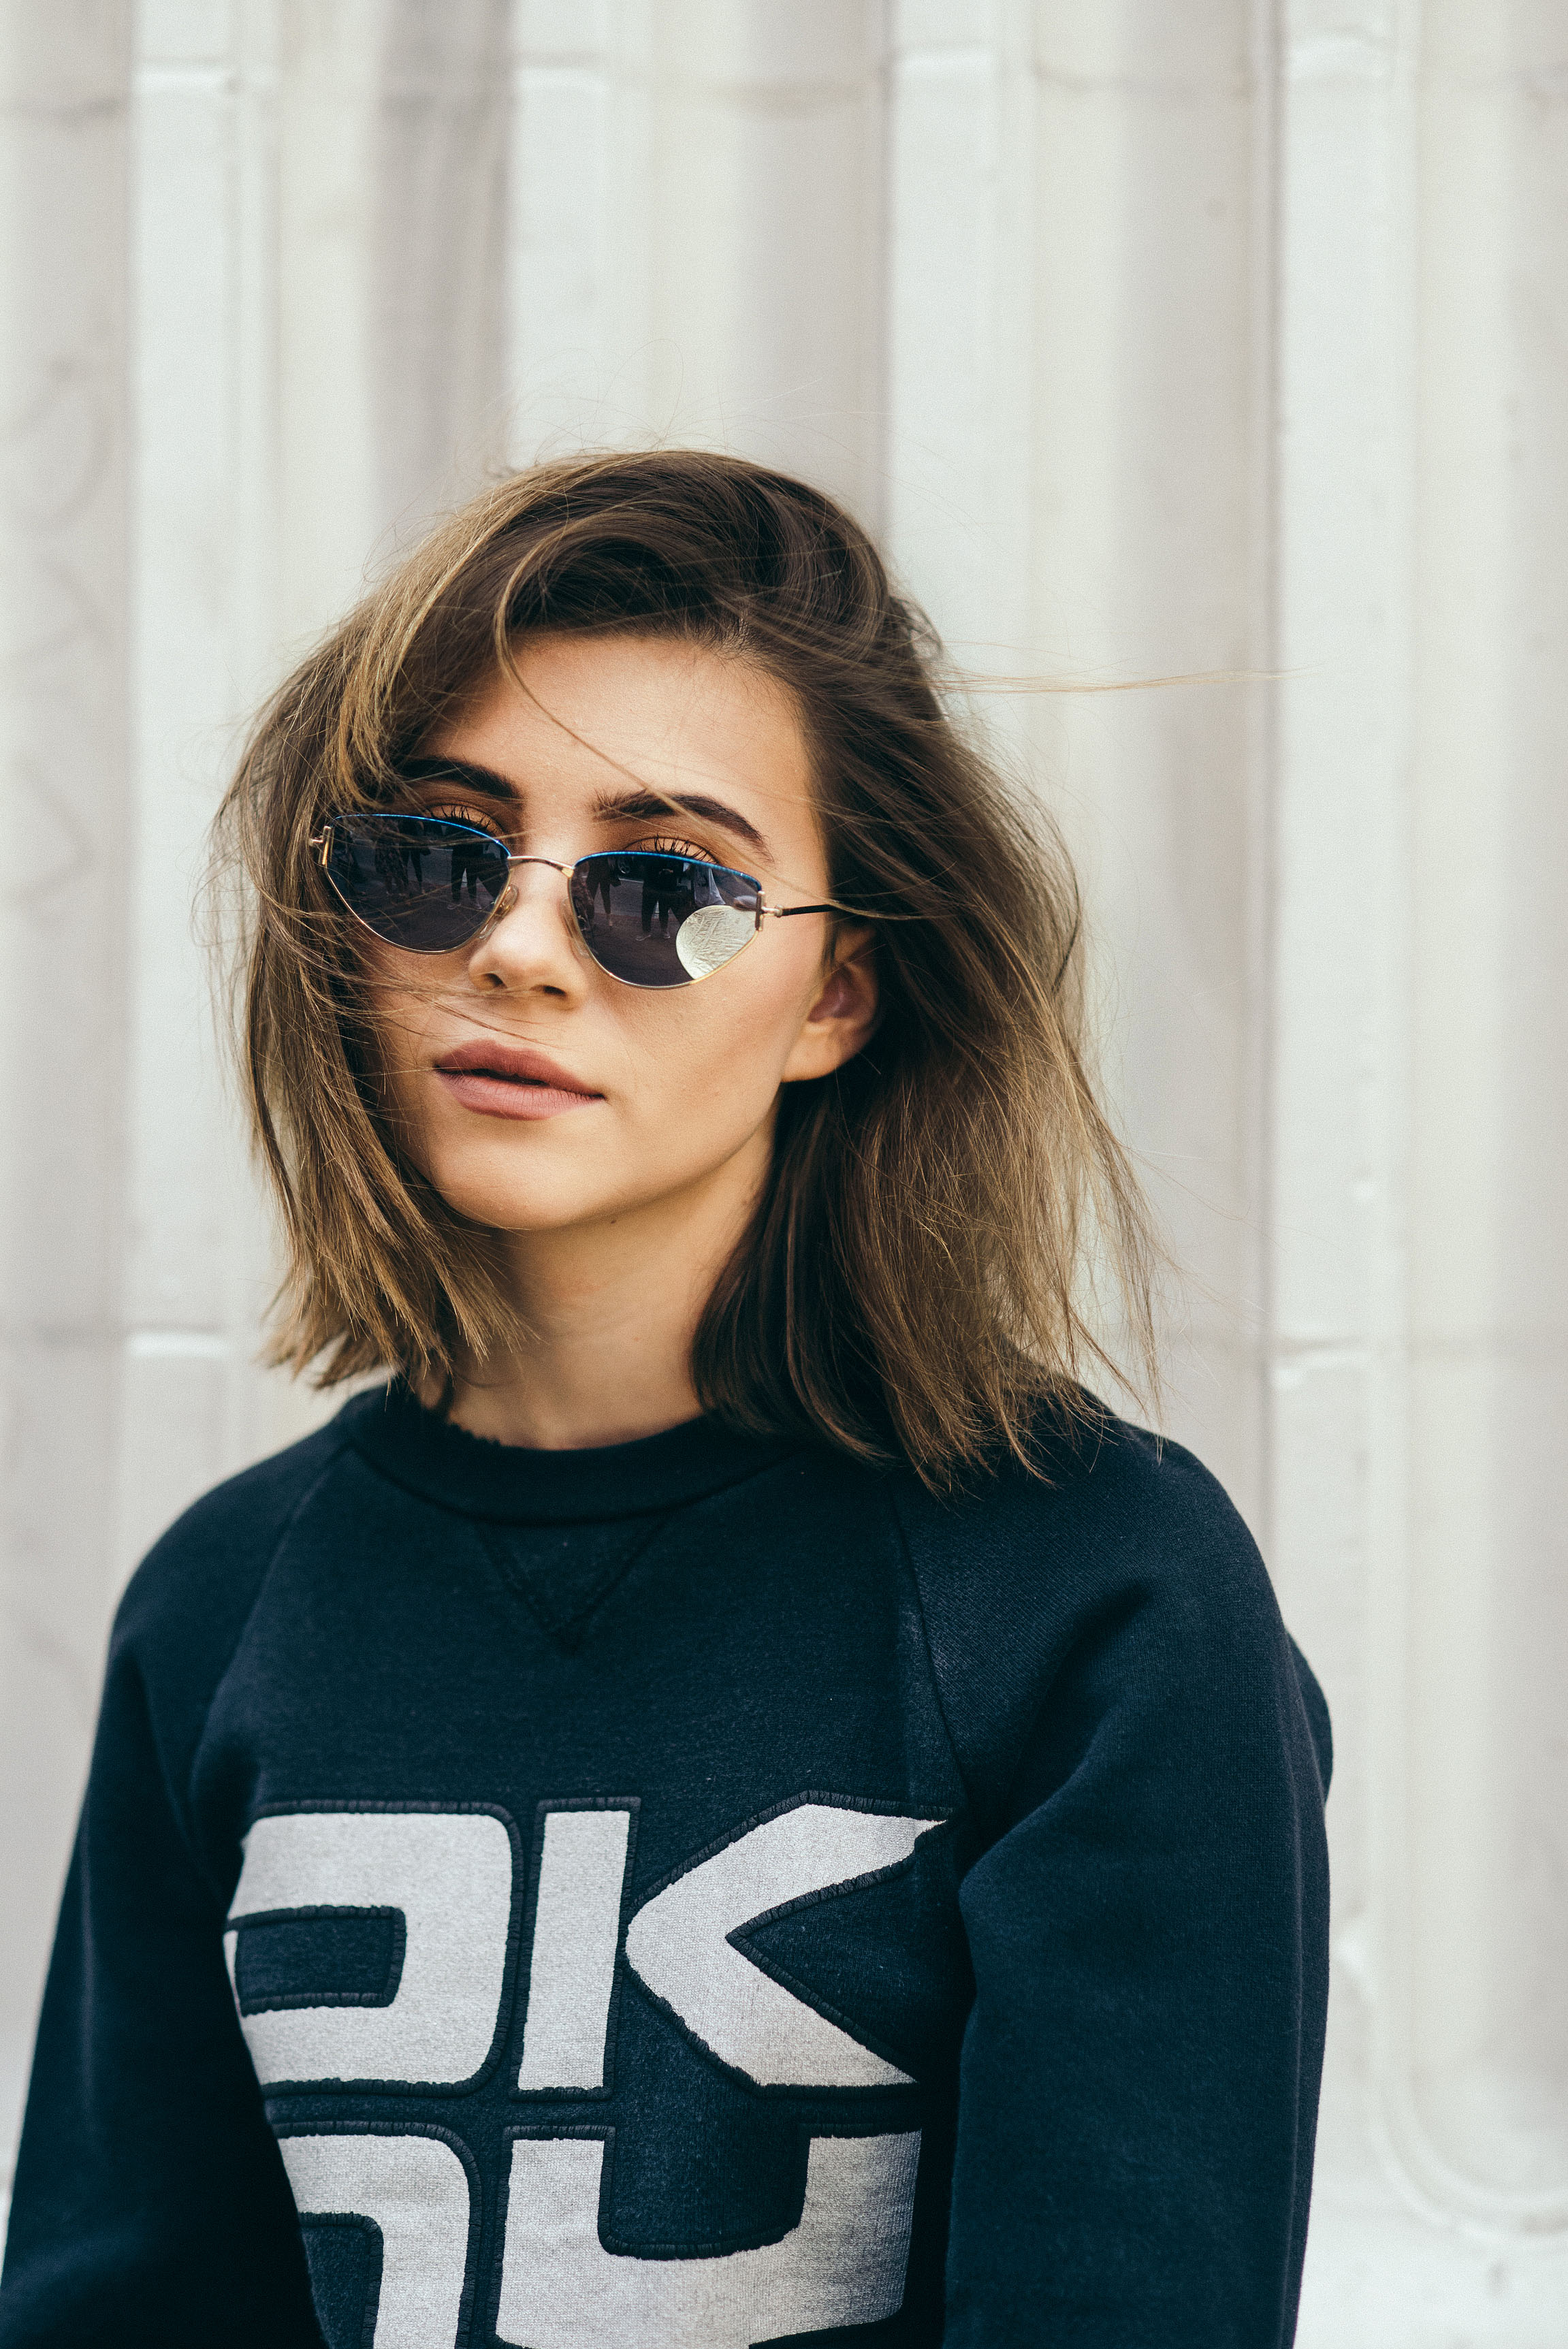  Olivia Stuck for SUSPEND Magazine photographed by Diane Abapo;   Small Shop LA &nbsp;glasses; DKNY sweatshirt from  Tried &amp; True Co.&nbsp;   